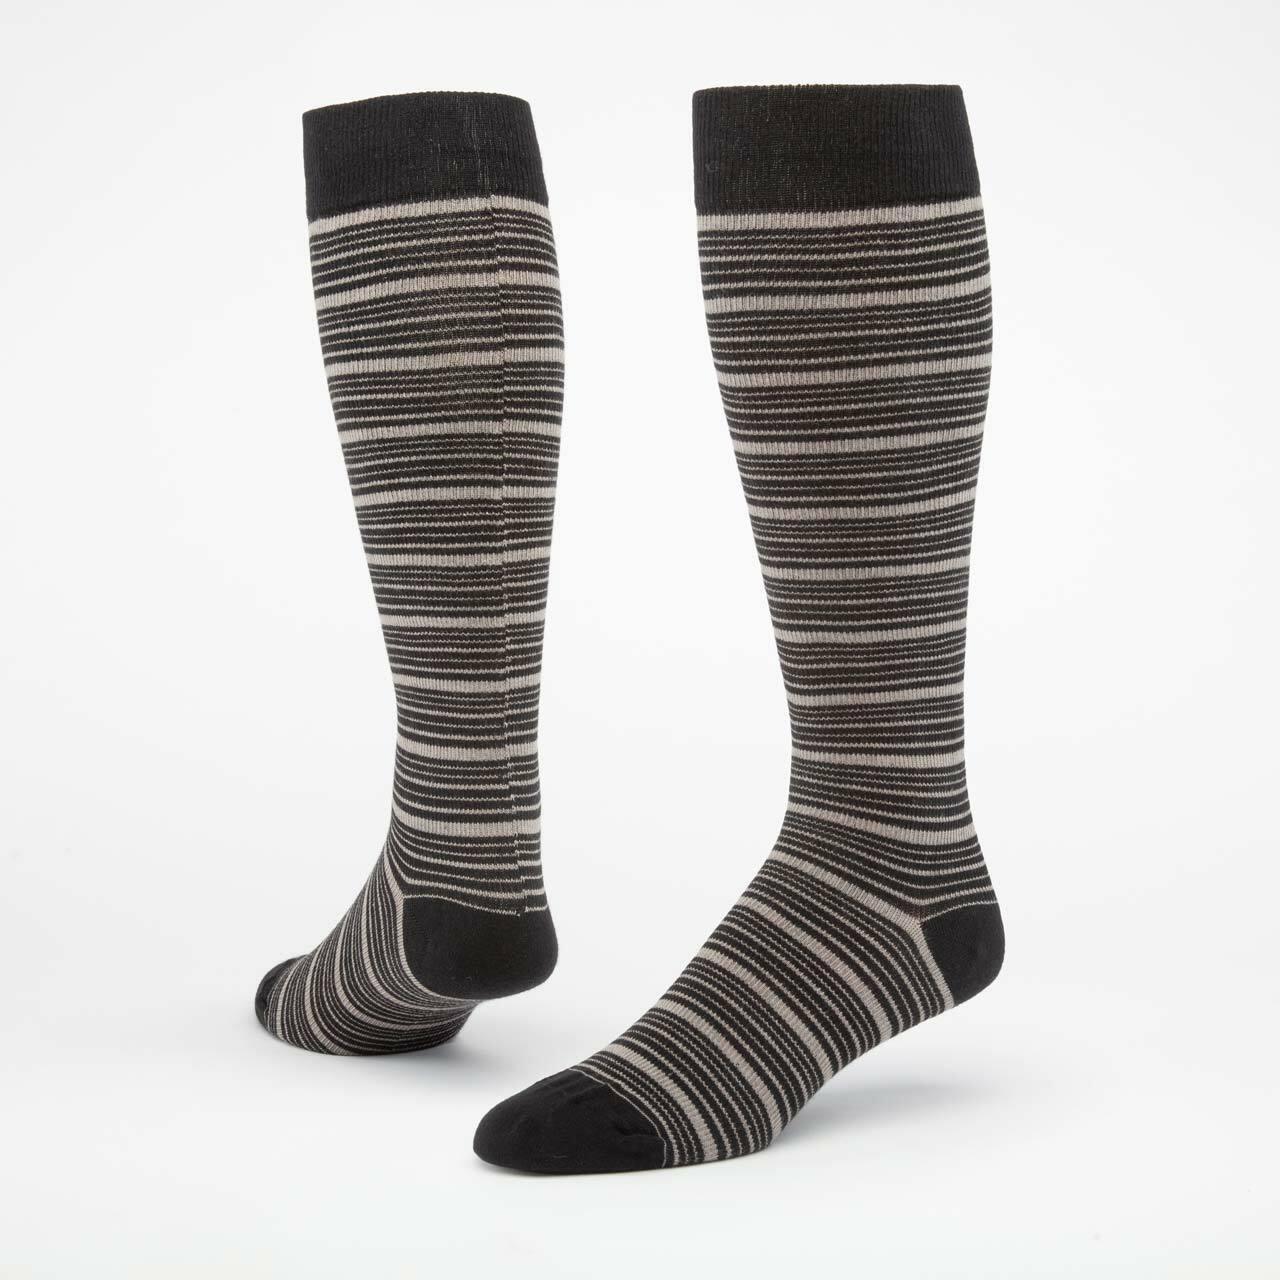 Maggie's All-Gender Organic Cotton Compression Socks - Maggie's Organics - The Sock Monster